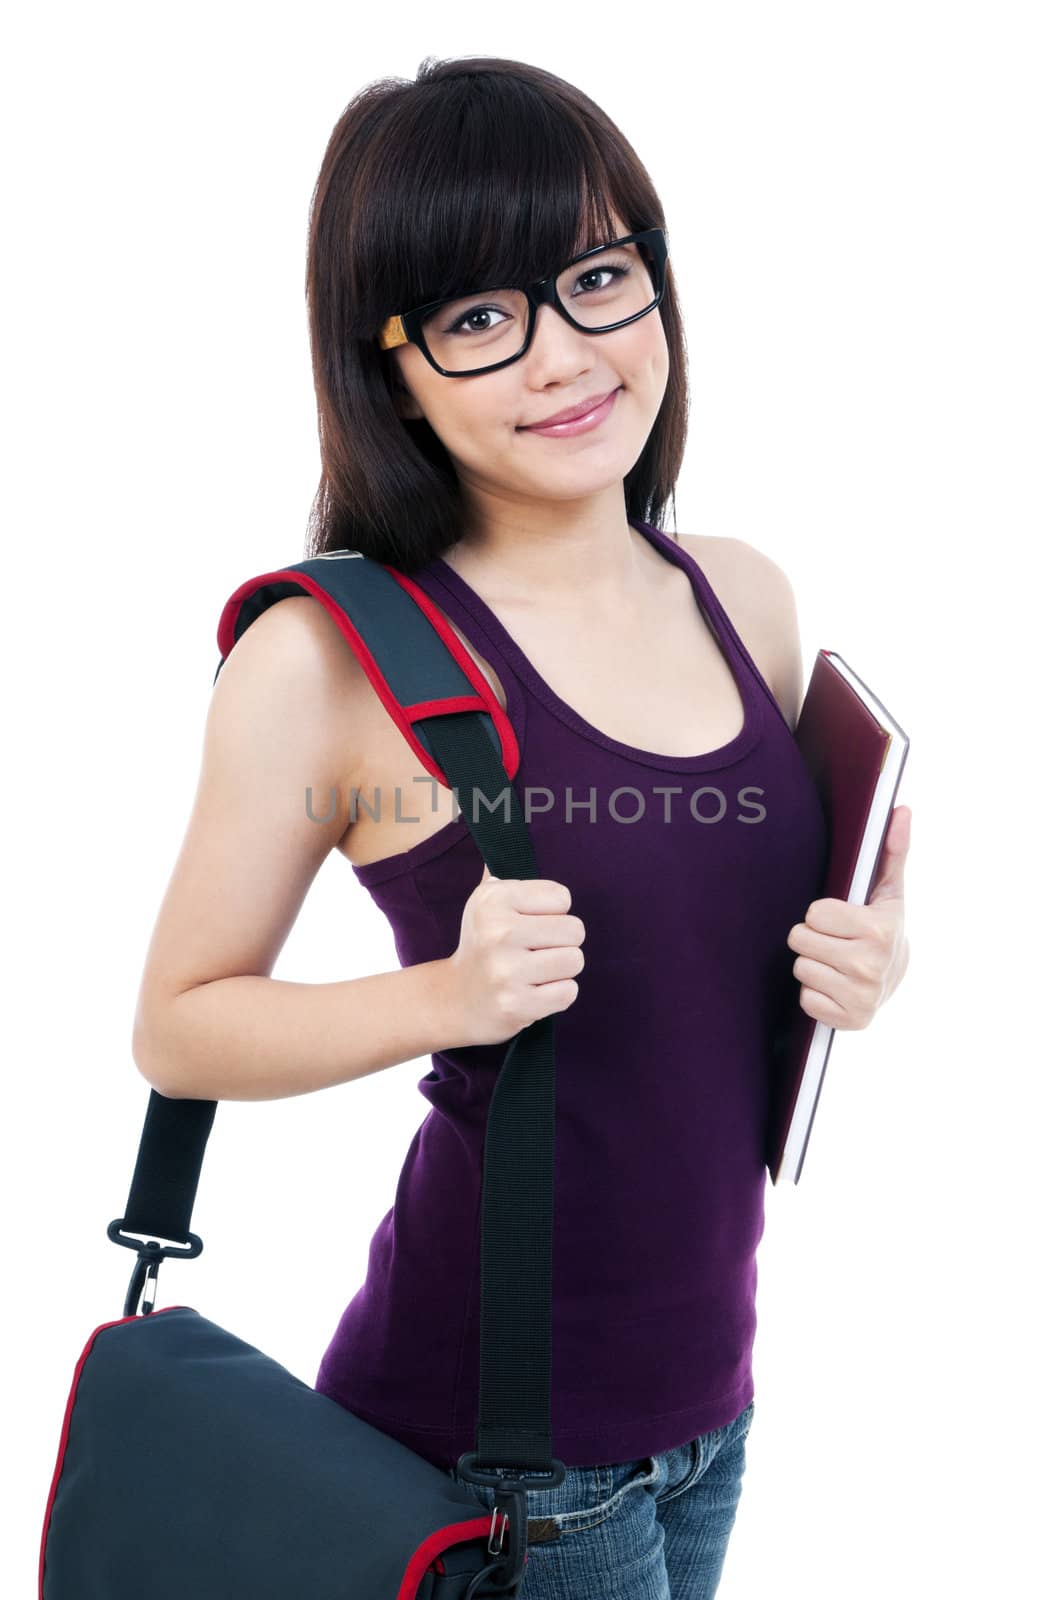 Portrait of a cute young woman holding her book and bag, isolated on white background.